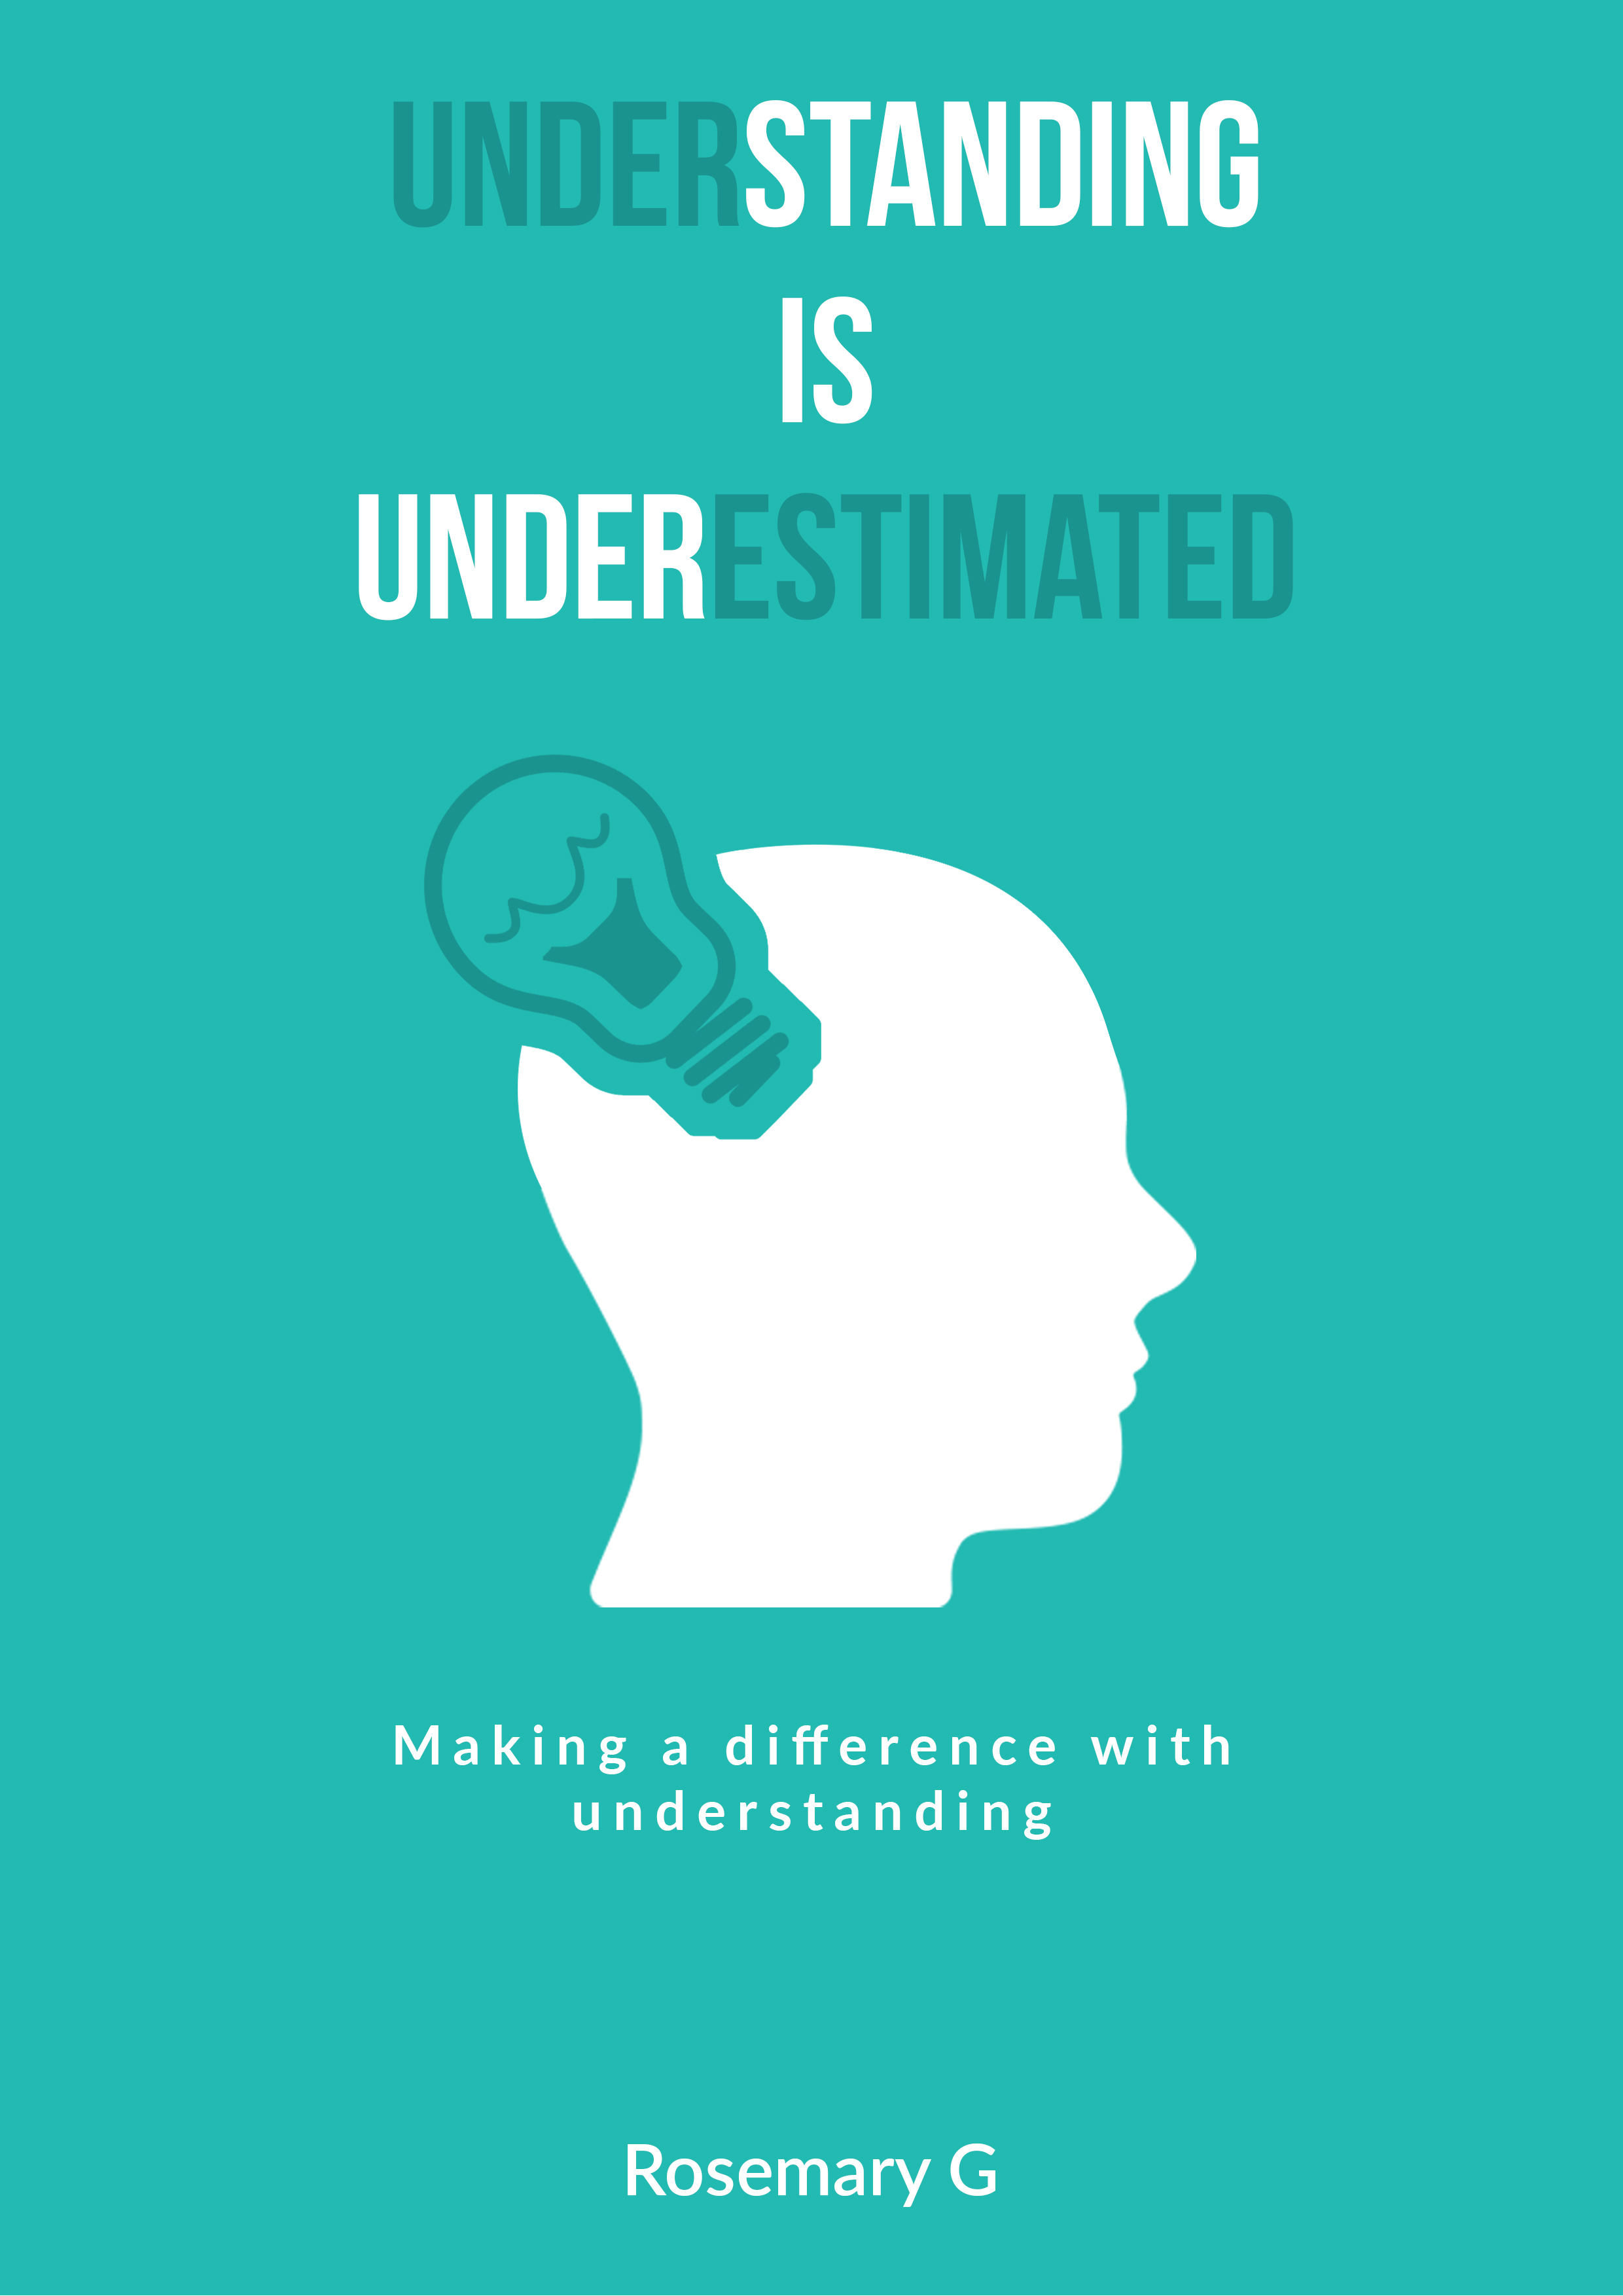 Three Ravens is excited to kick off the new year with our first Non-Fiction title, Understanding is Underestimated by Author and Life Coach Rosemary G. Welcome to the Murder!